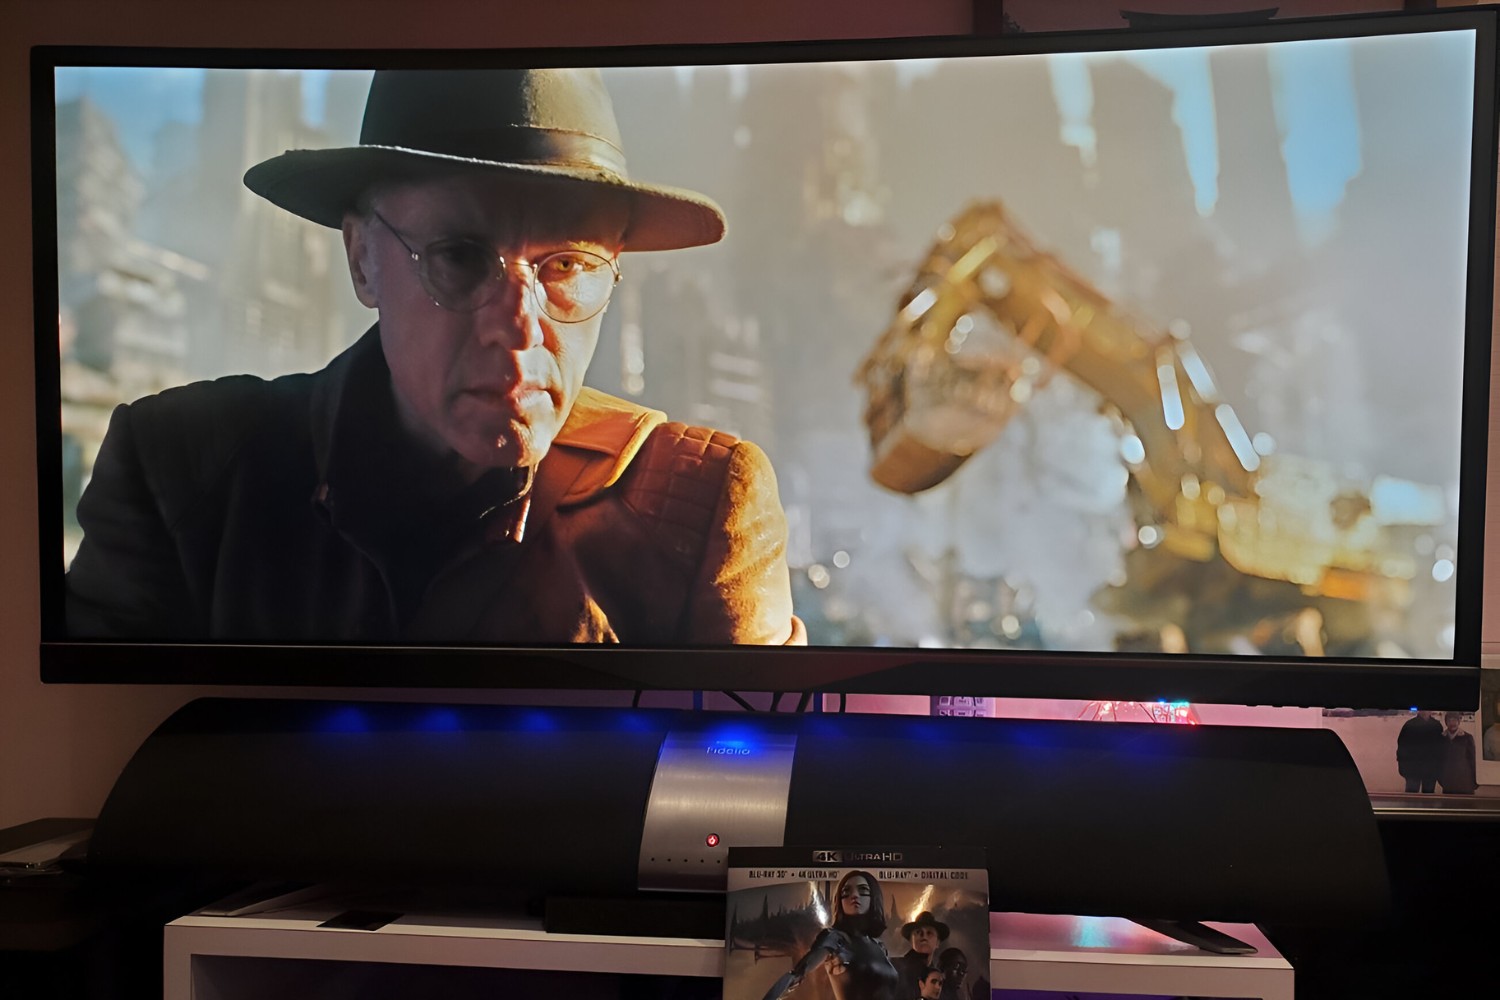 How To View Videos In Fullscreen On An Ultrawide Monitor